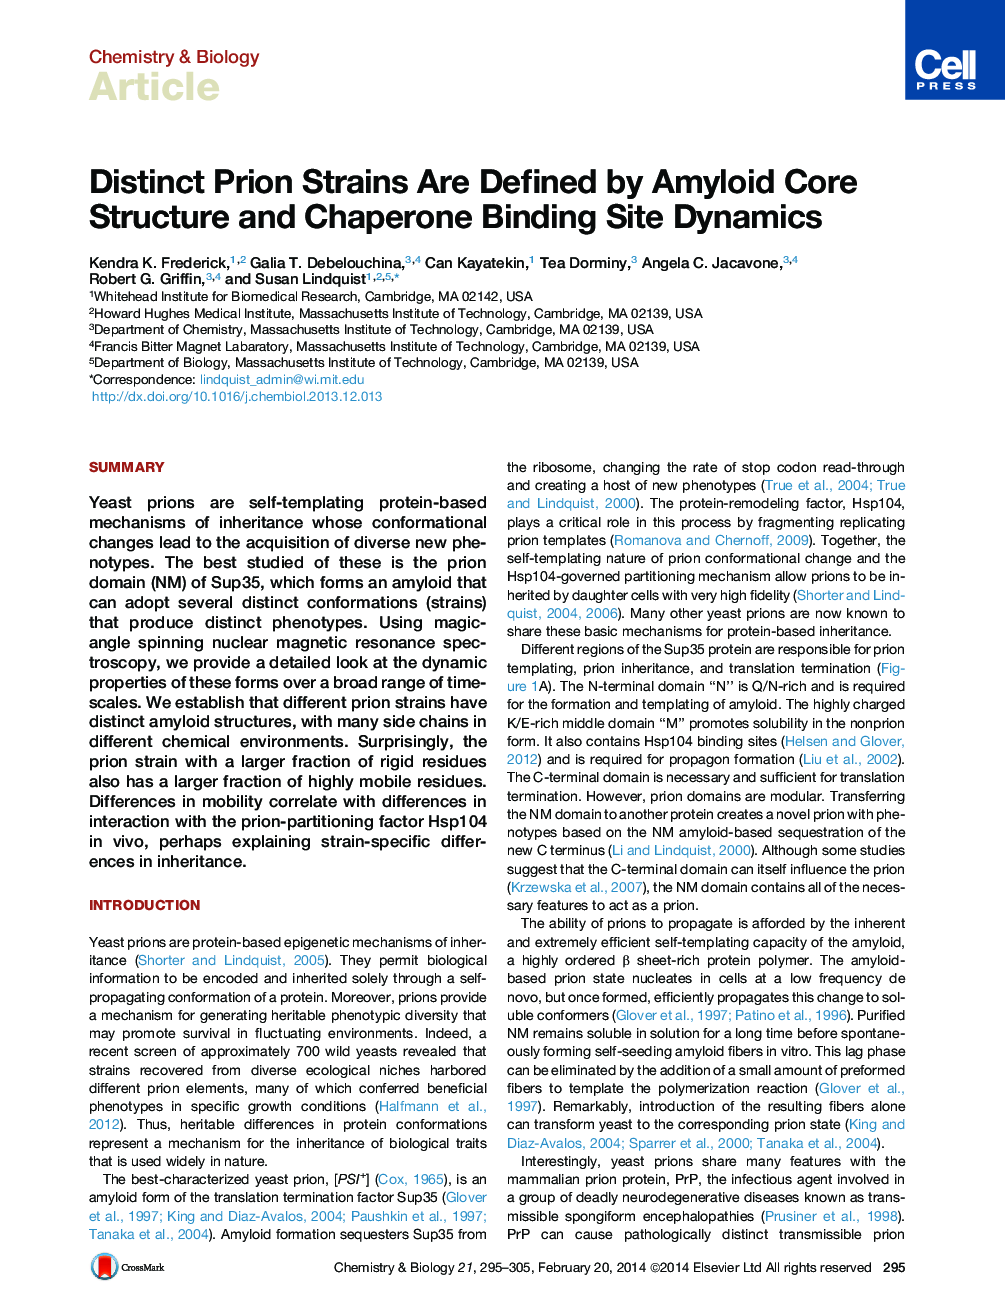 Distinct Prion Strains Are Defined by Amyloid Core Structure and Chaperone Binding Site Dynamics